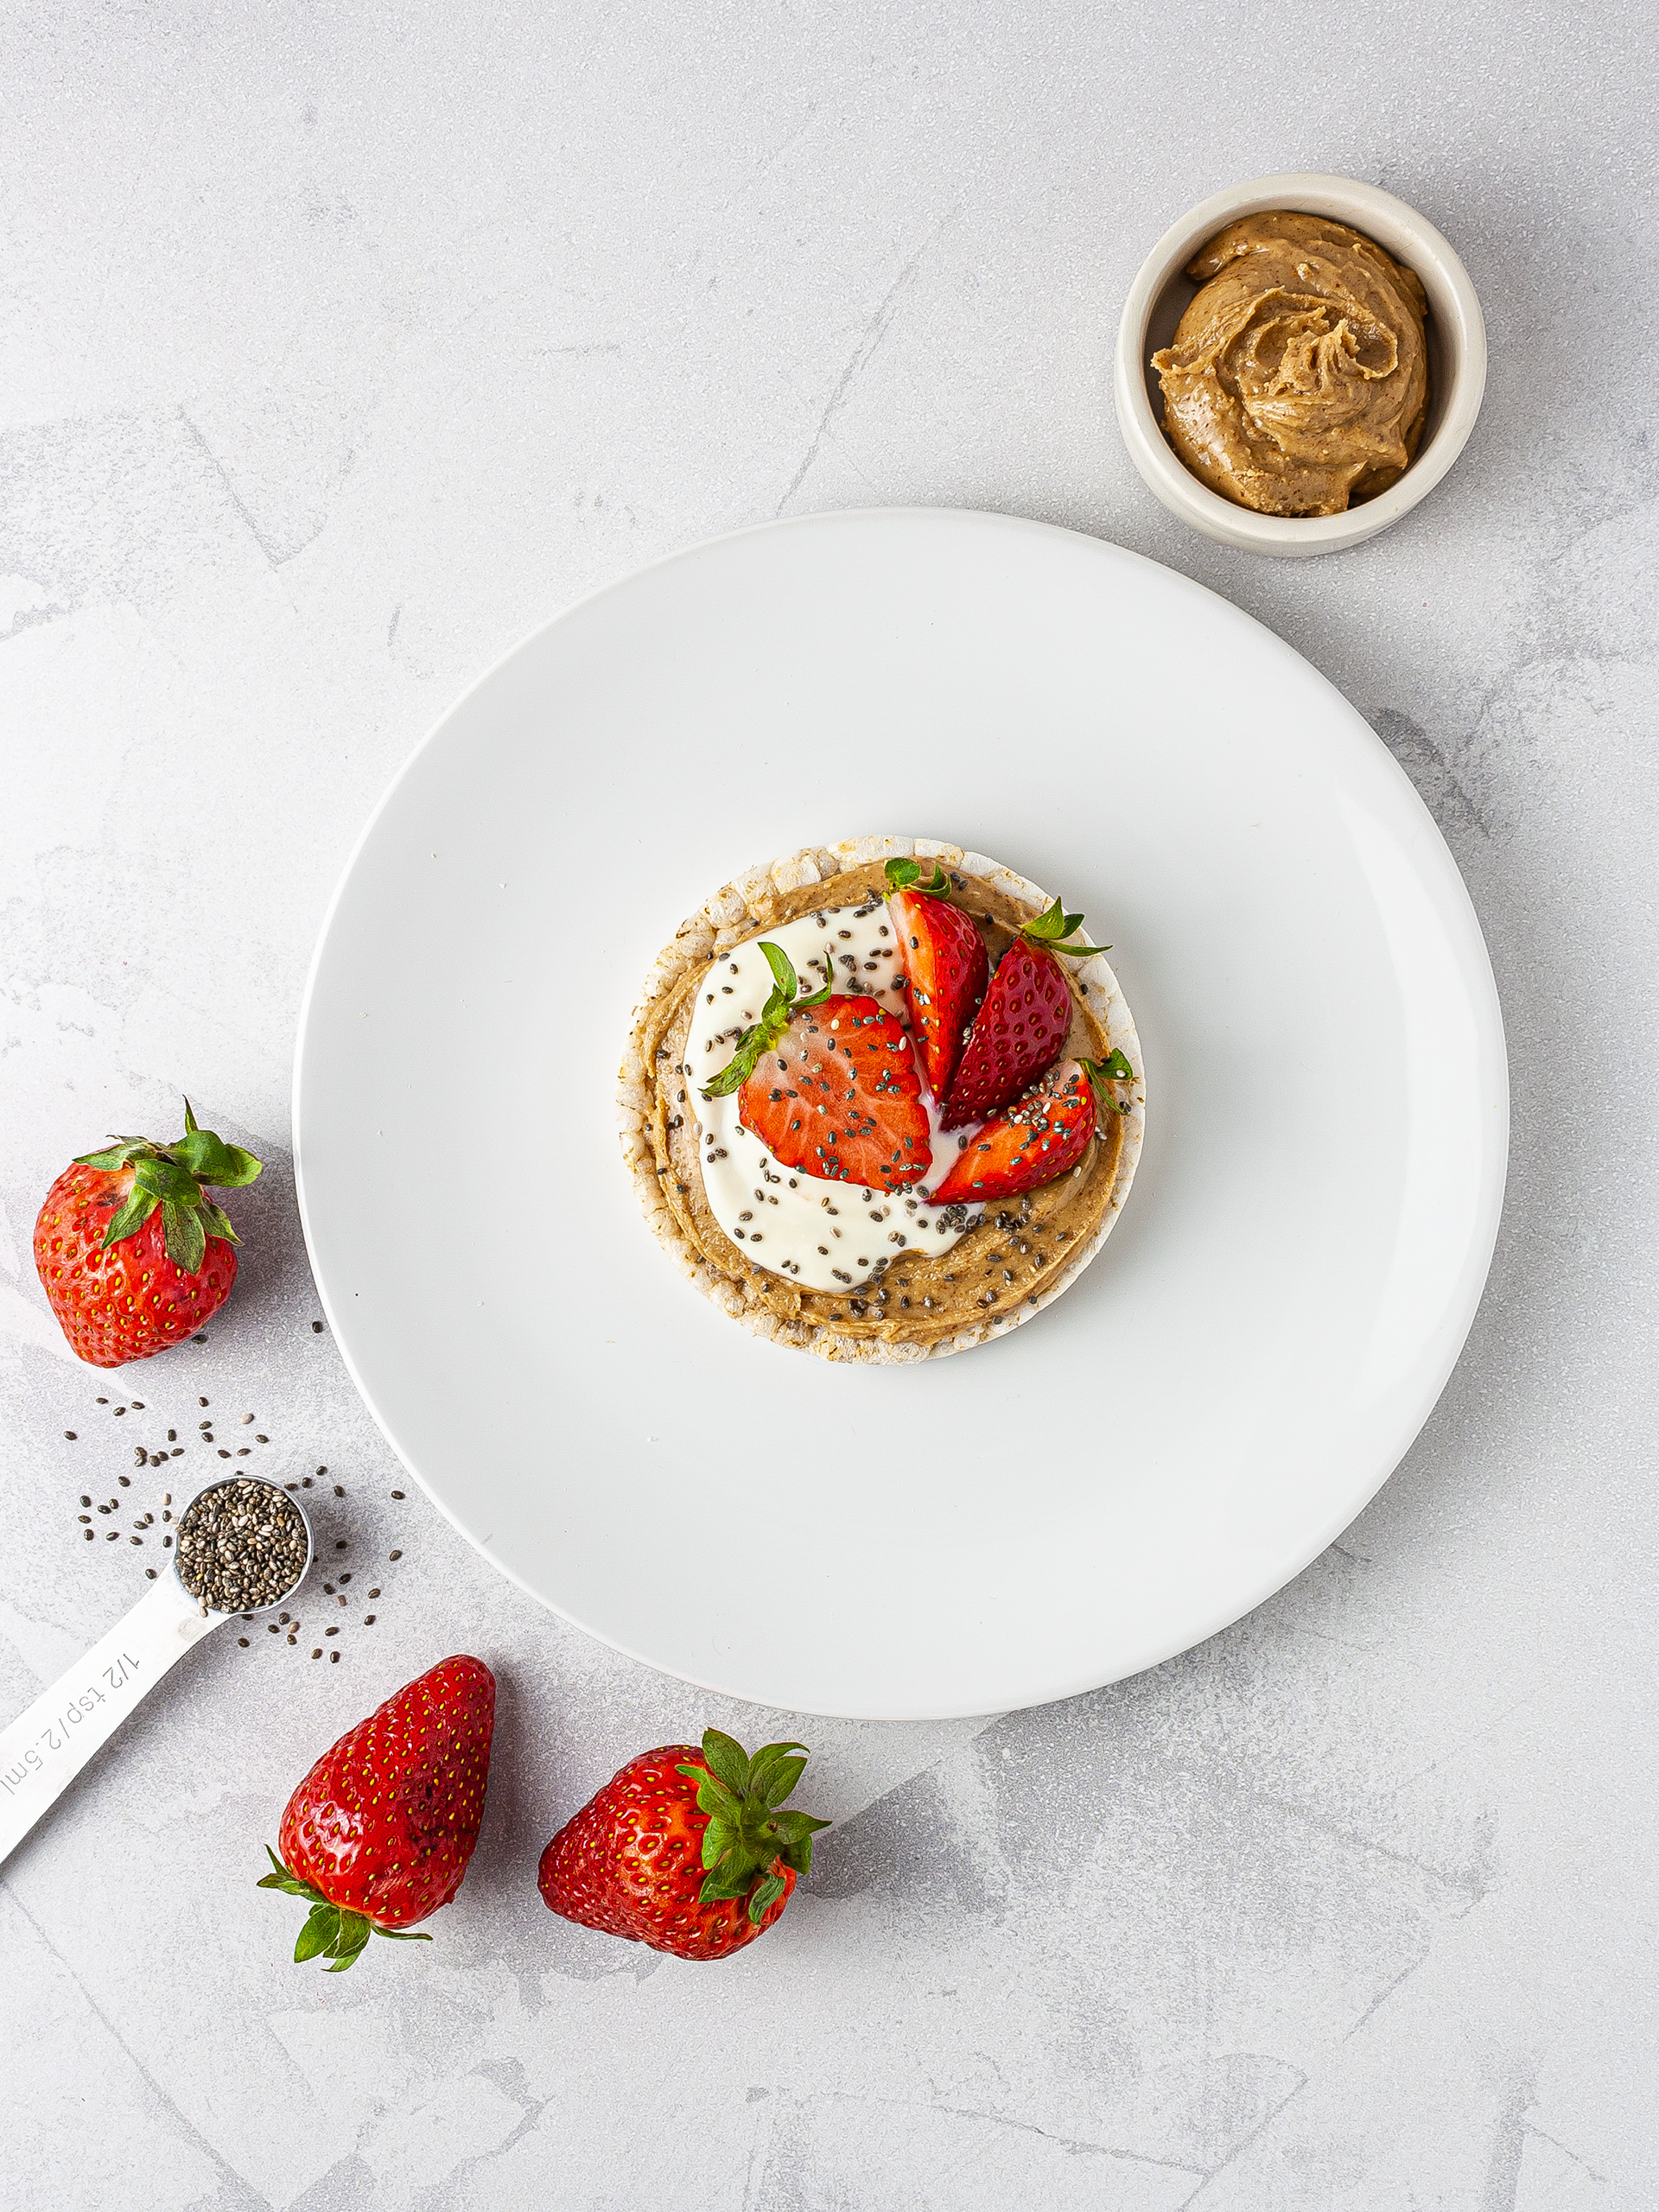 Rice cake with almond butter, yogurt, strawberries and chia seeds.